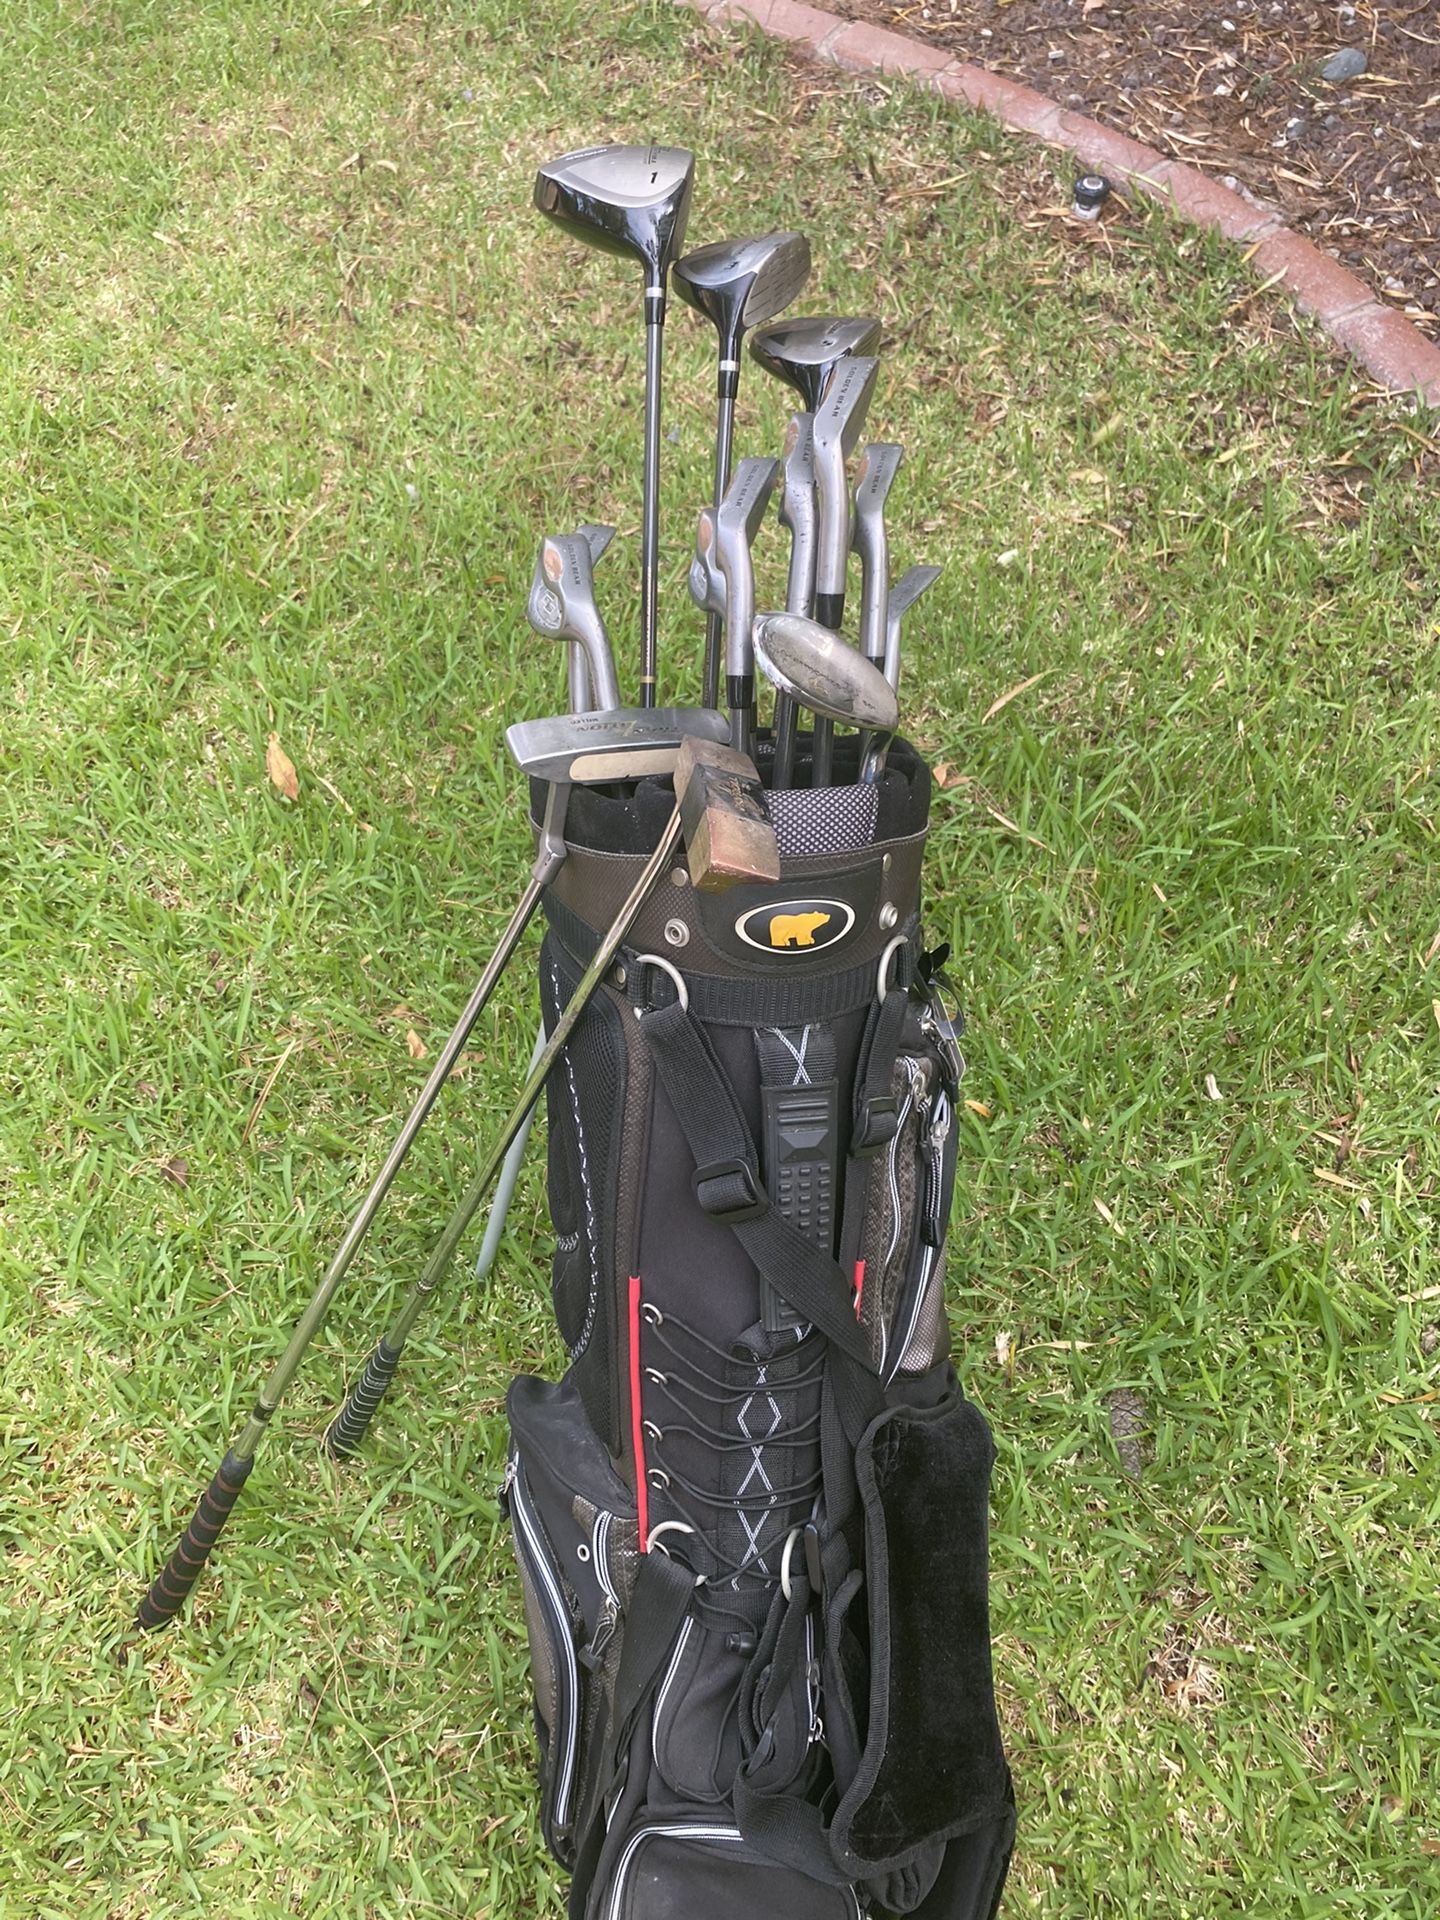 Golden Bear golf club sets with 2 putters